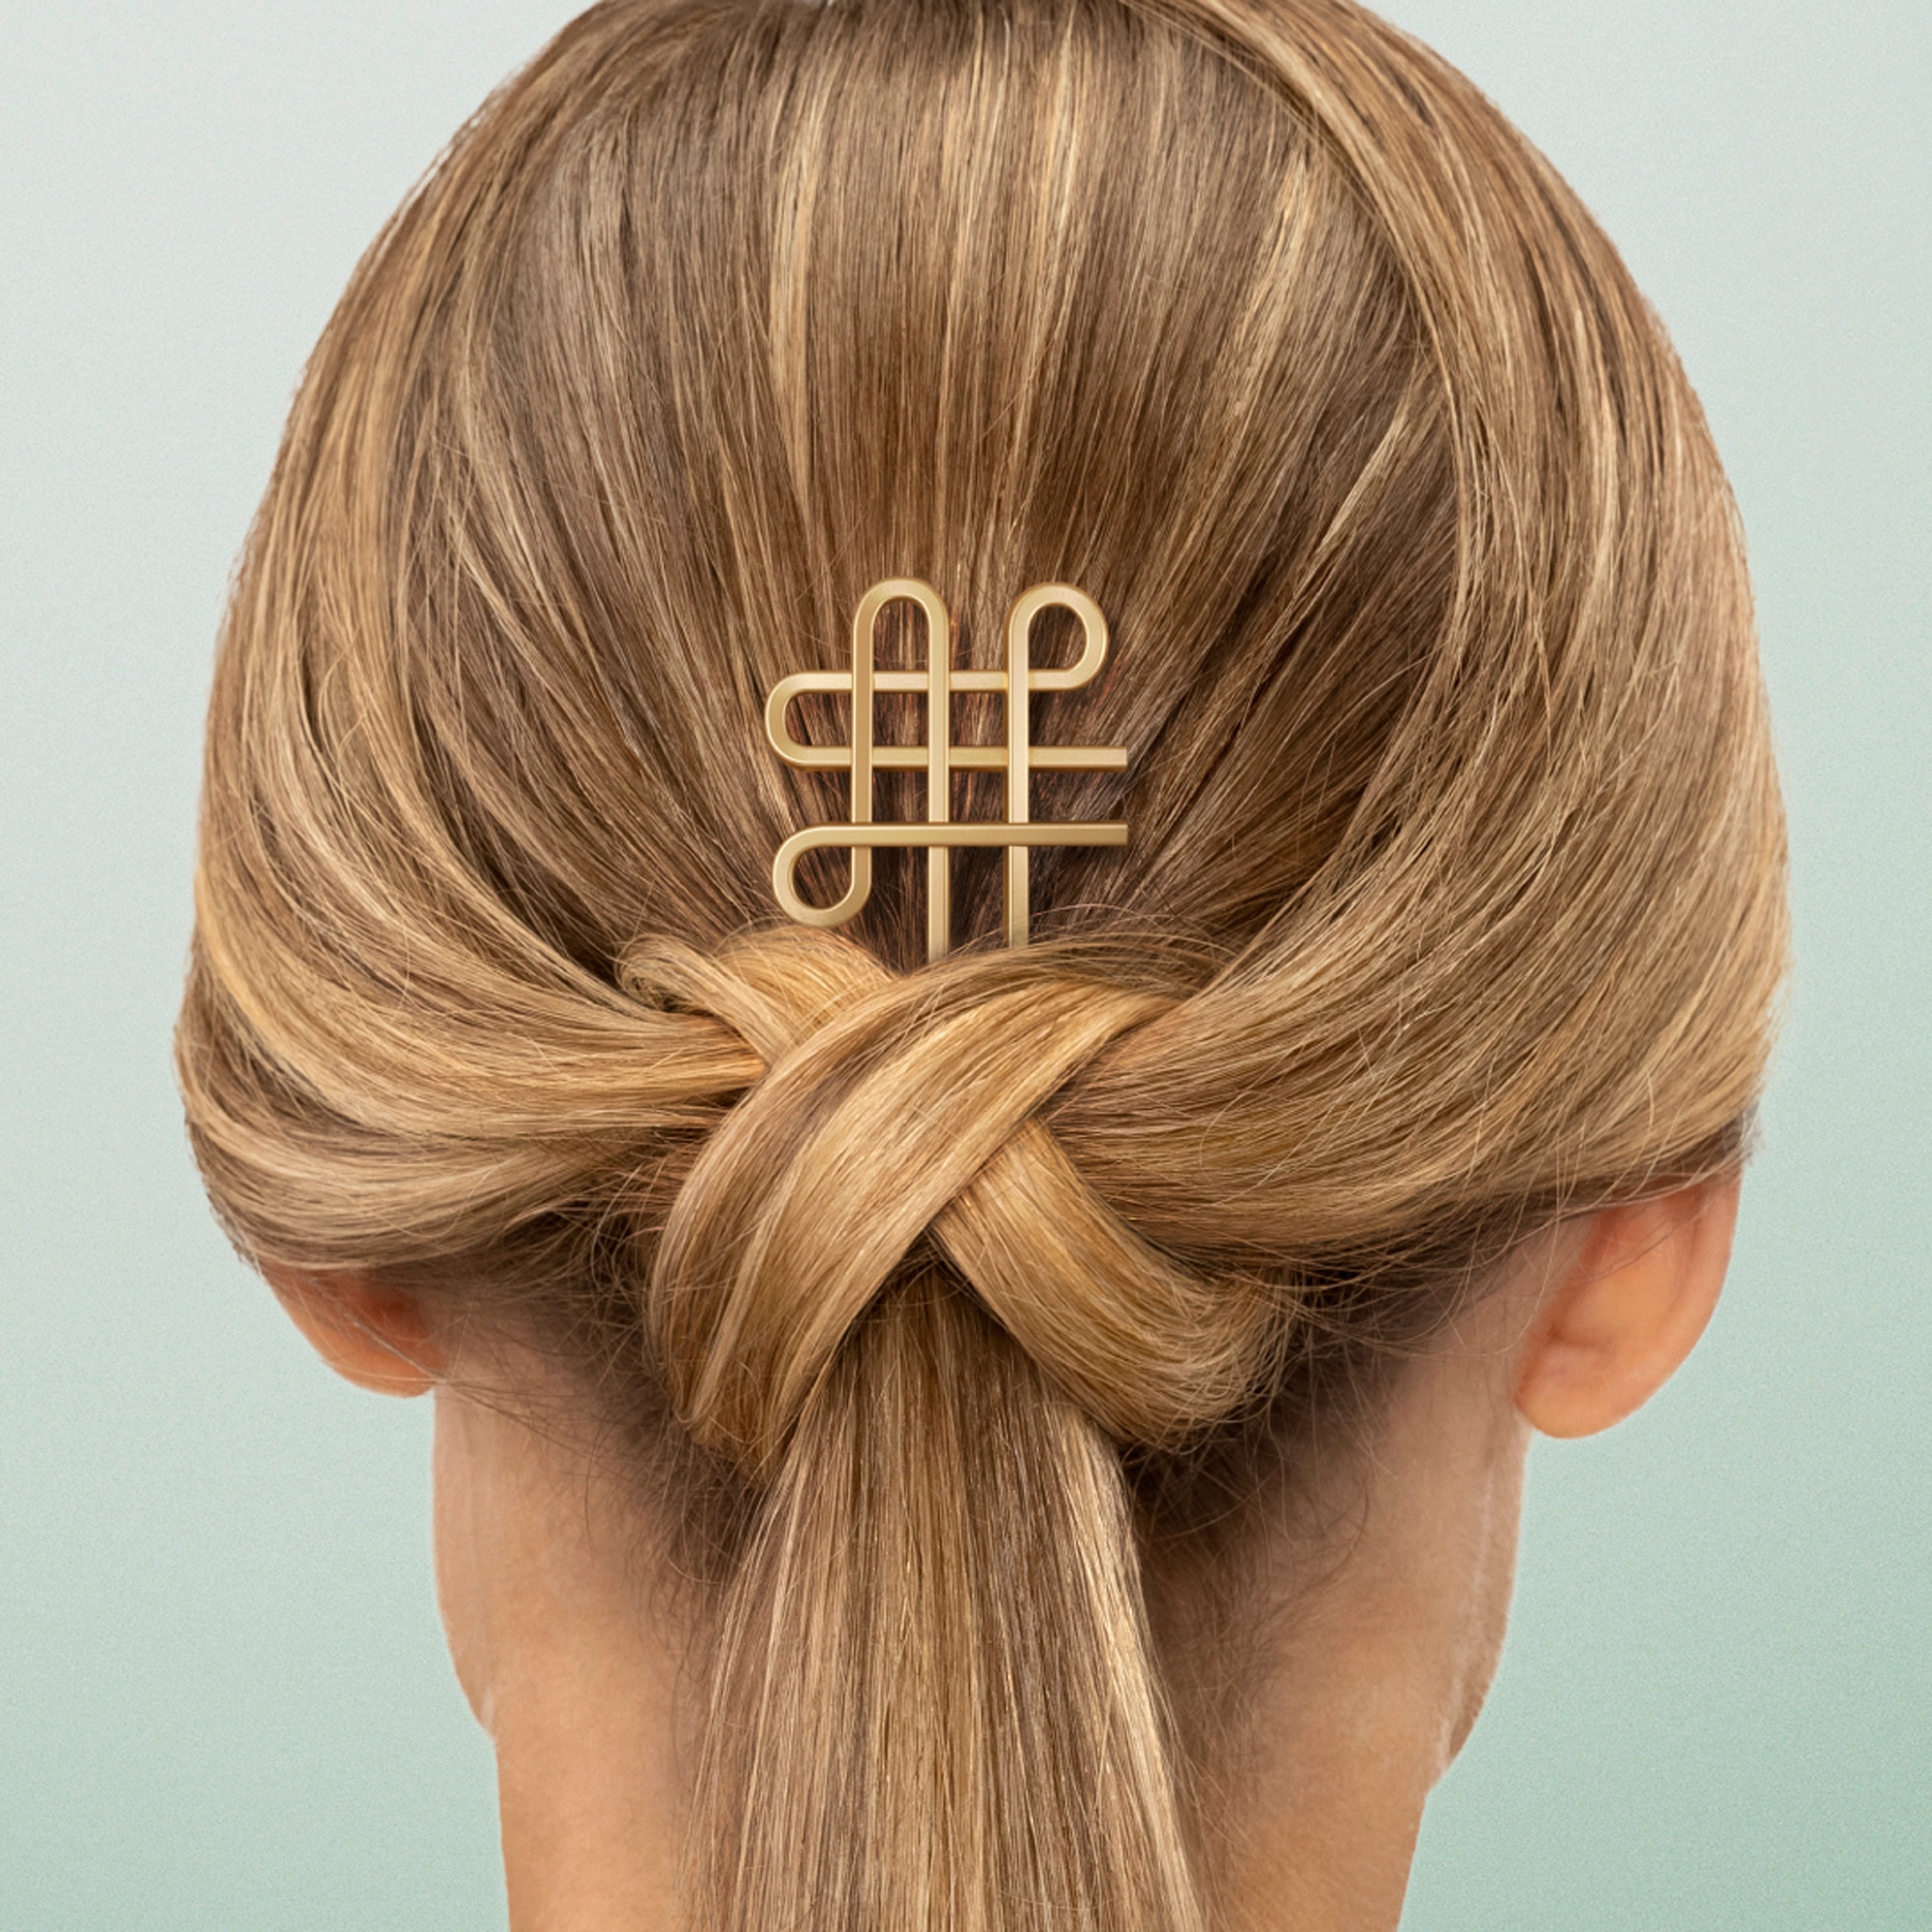 Blonde hair in knot with hair pin